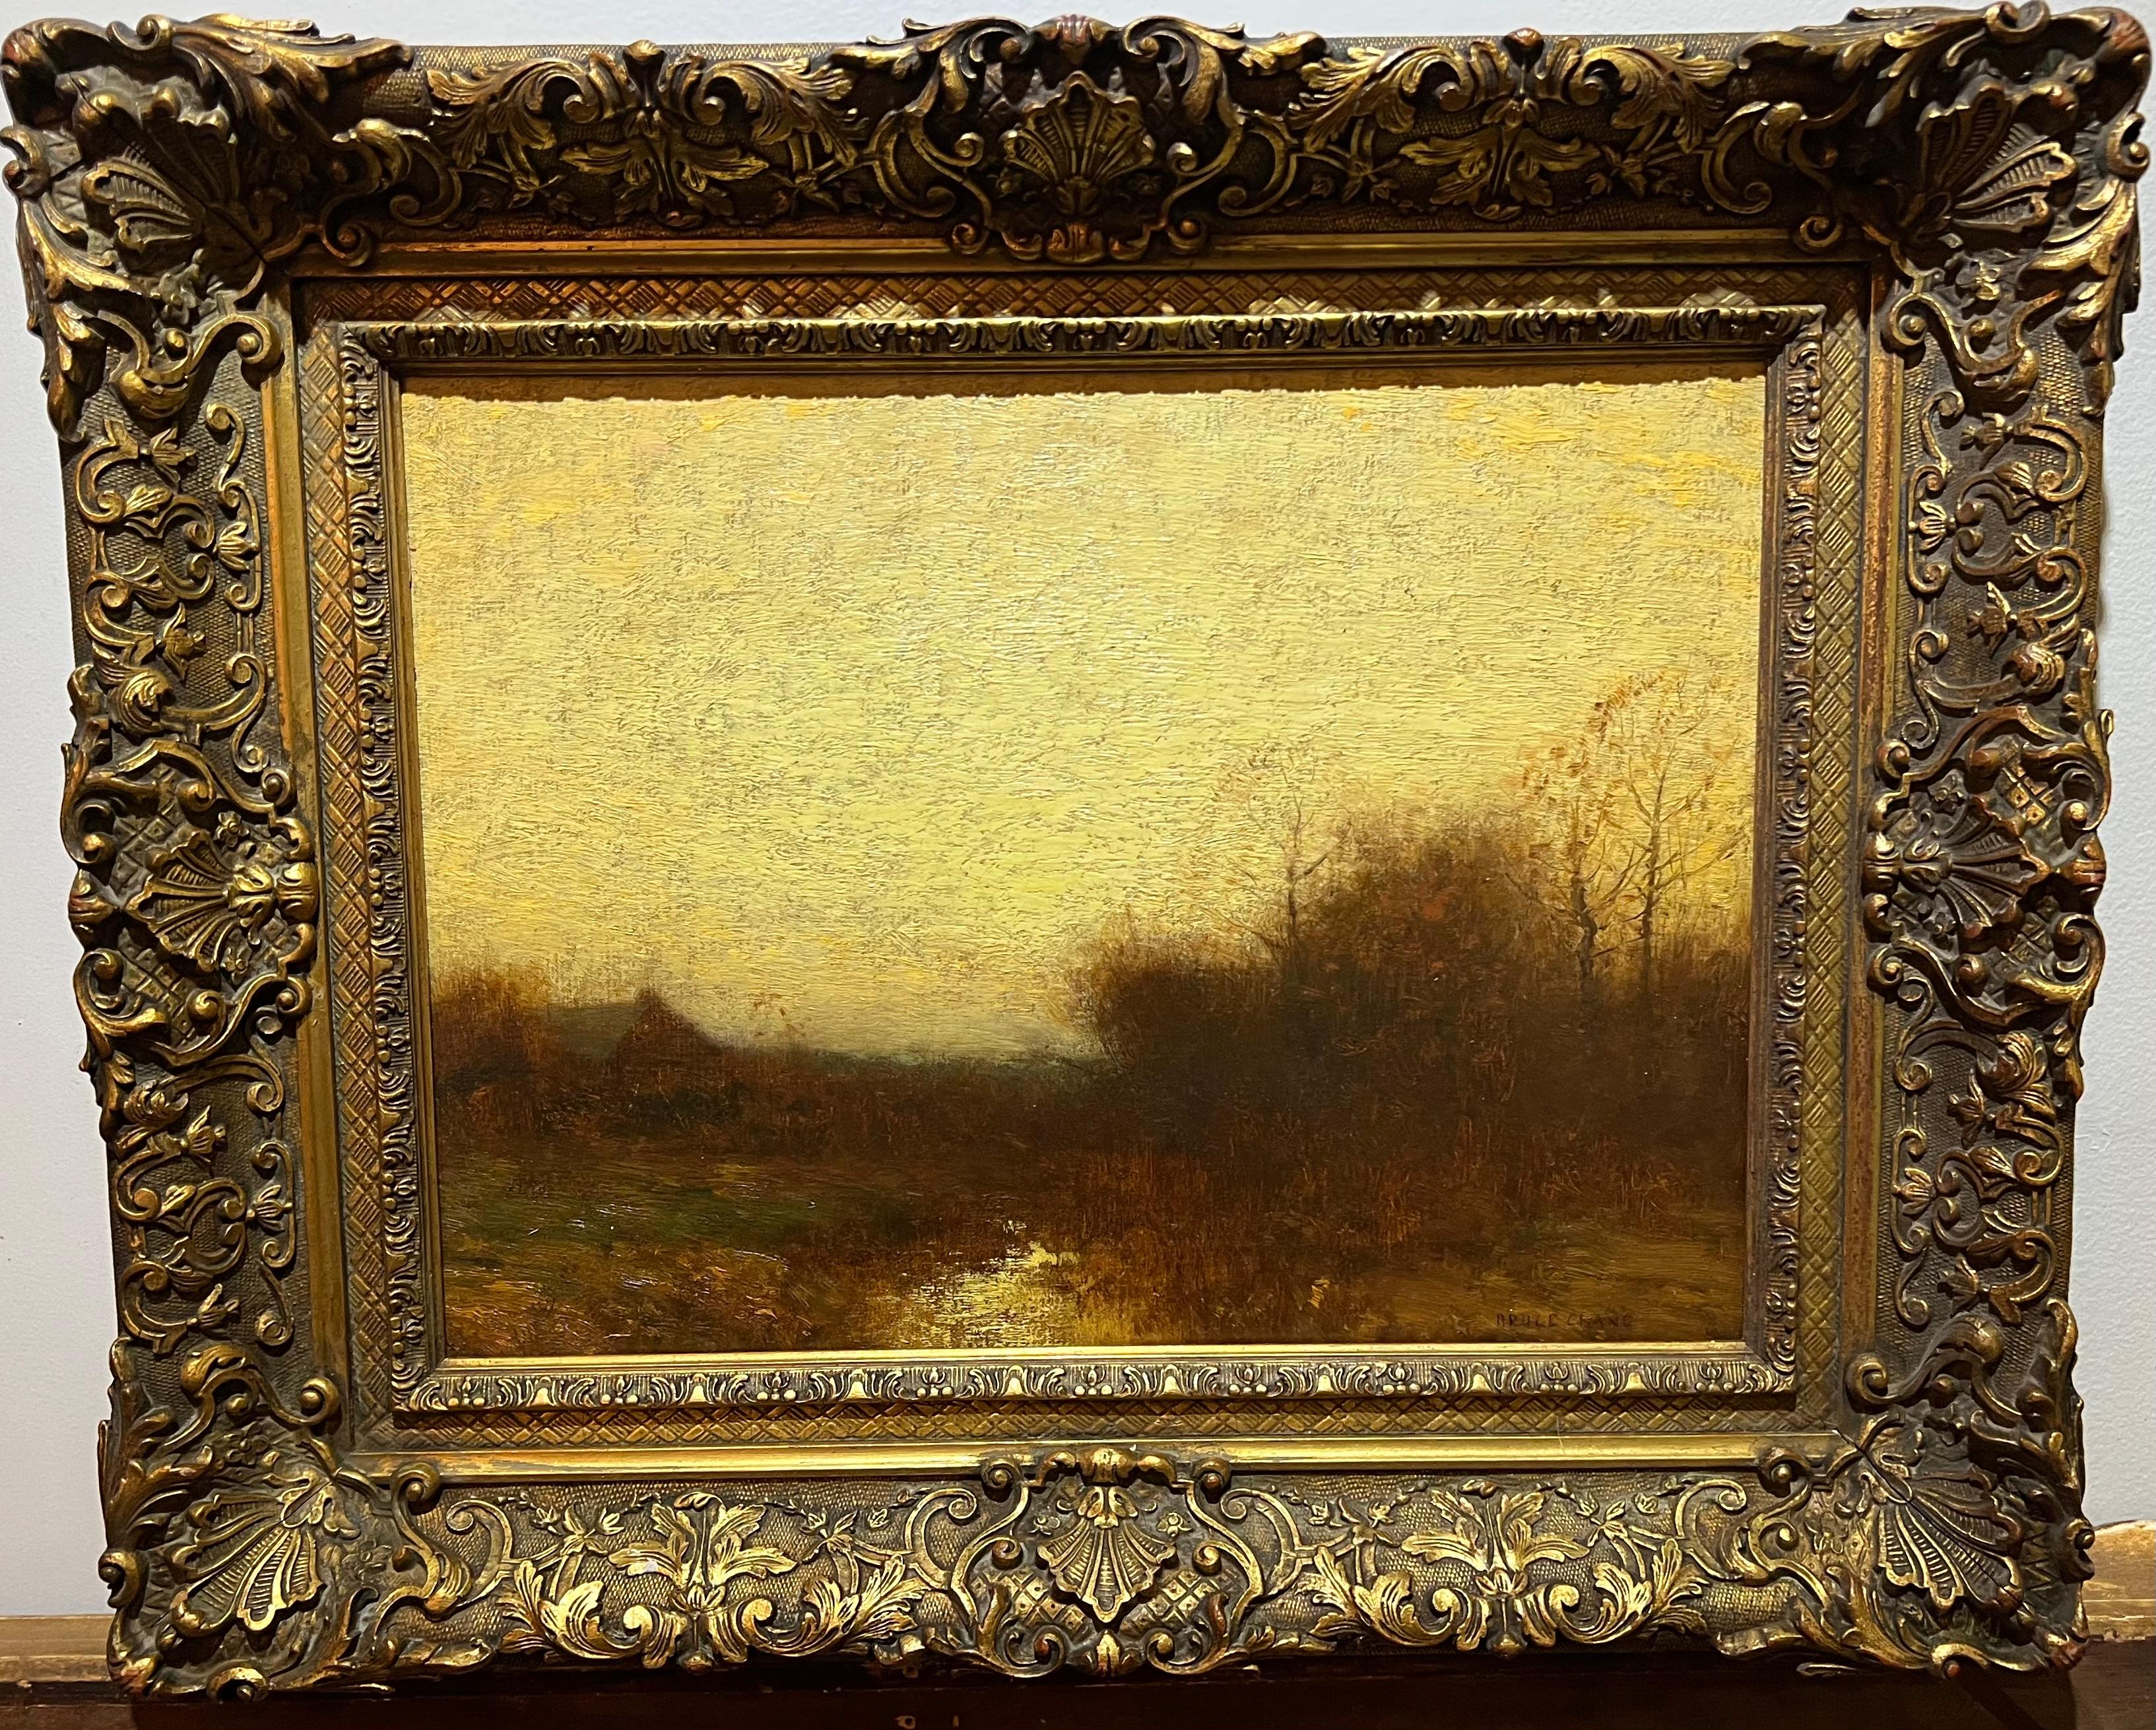 Bruce Crane (18587-1937) is an American Tonalist Landscape Painter, and famous for his sunset paintings with heavy different layers of paint.  He painted mostly in Connecticut and New York.  

Robert Bruce Crane was an American painter. He joined